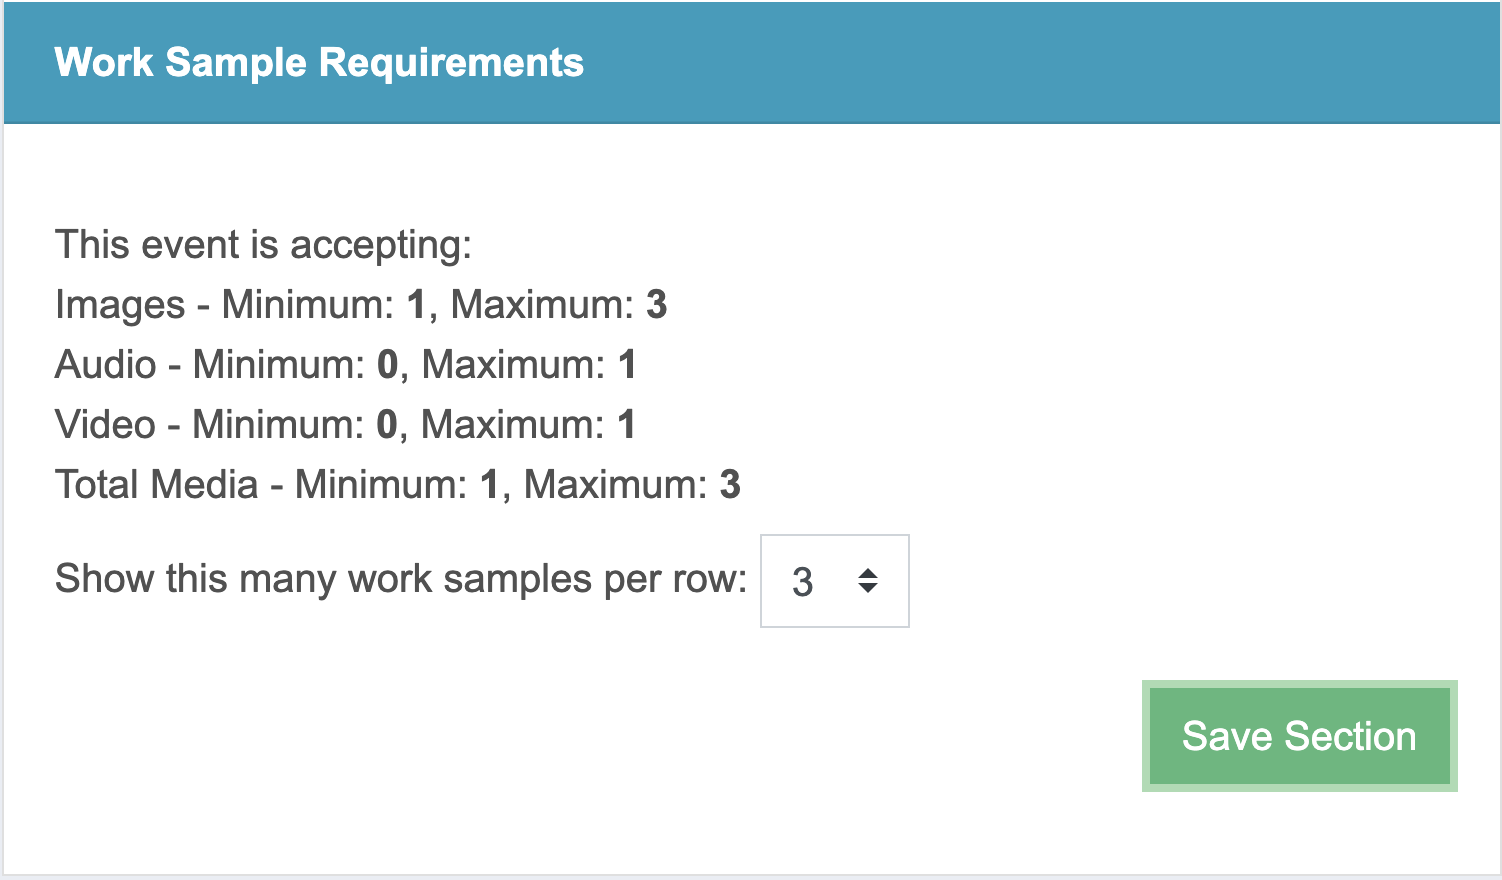 Screenshot of the work sample requirements for applicants.